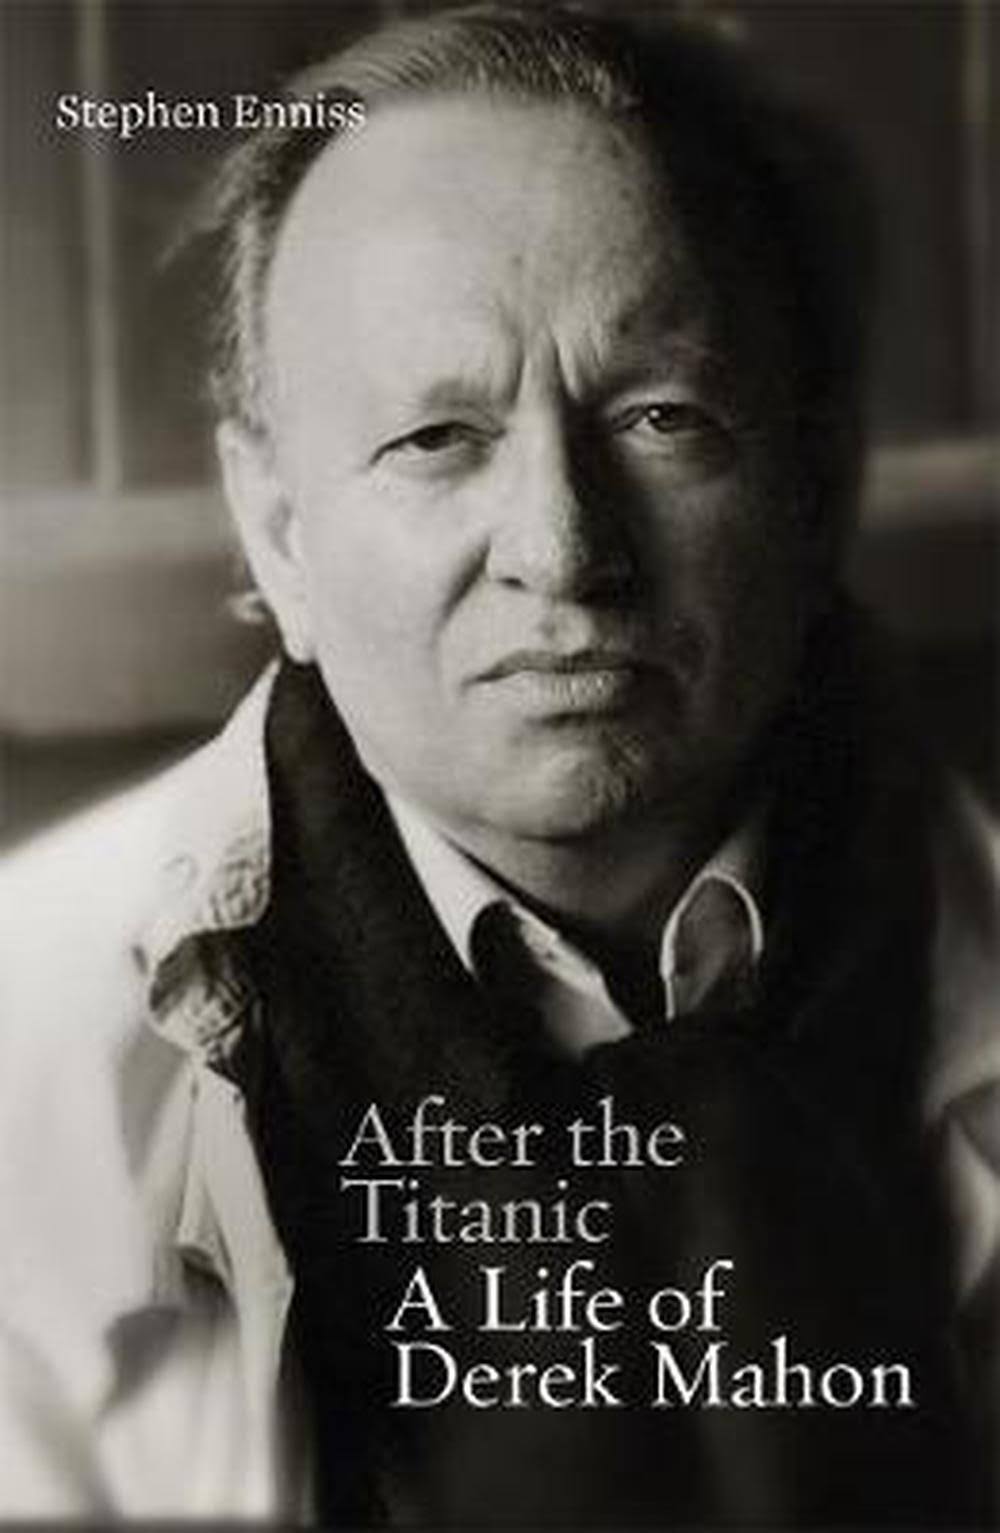 After the Titanic: A Life of Derek Mahon [Book]